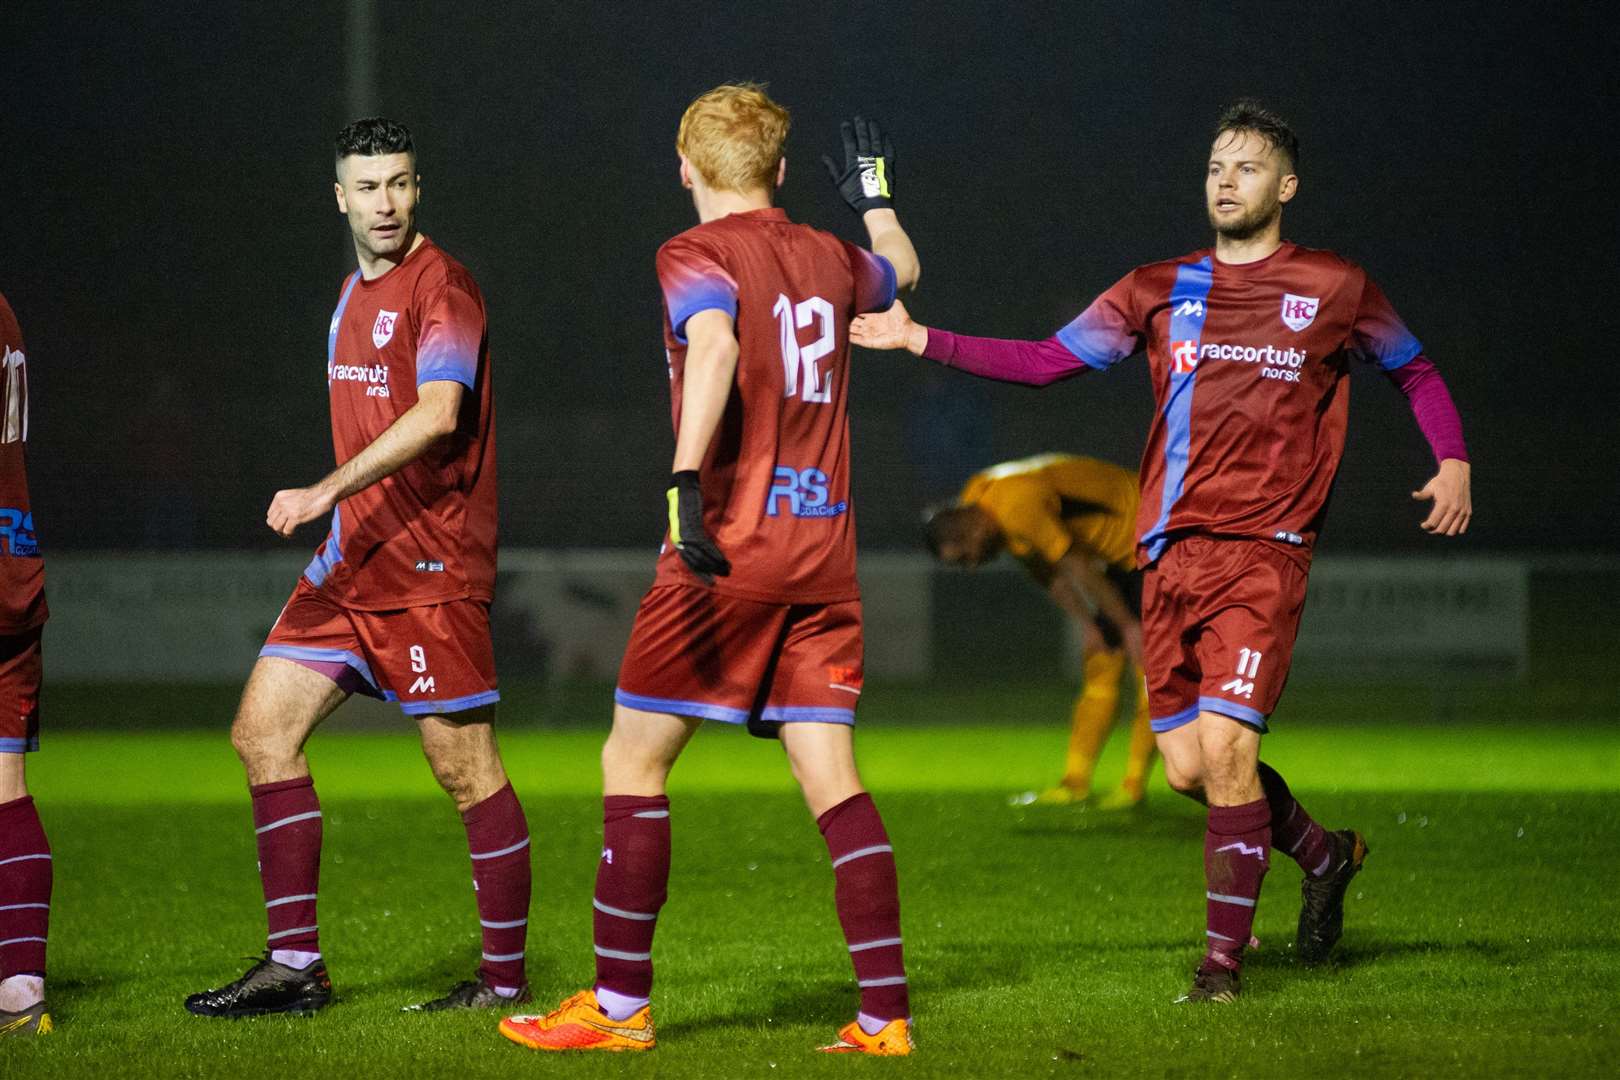 Keith's Logan Watt celebrates after scoring a second half header...Keith FC (5) vs Fort William (1) - Scottish Cup Second Preliminary Round - Kyncoh Park, Keith 12/12/2020...Picture: Daniel Forsyth..